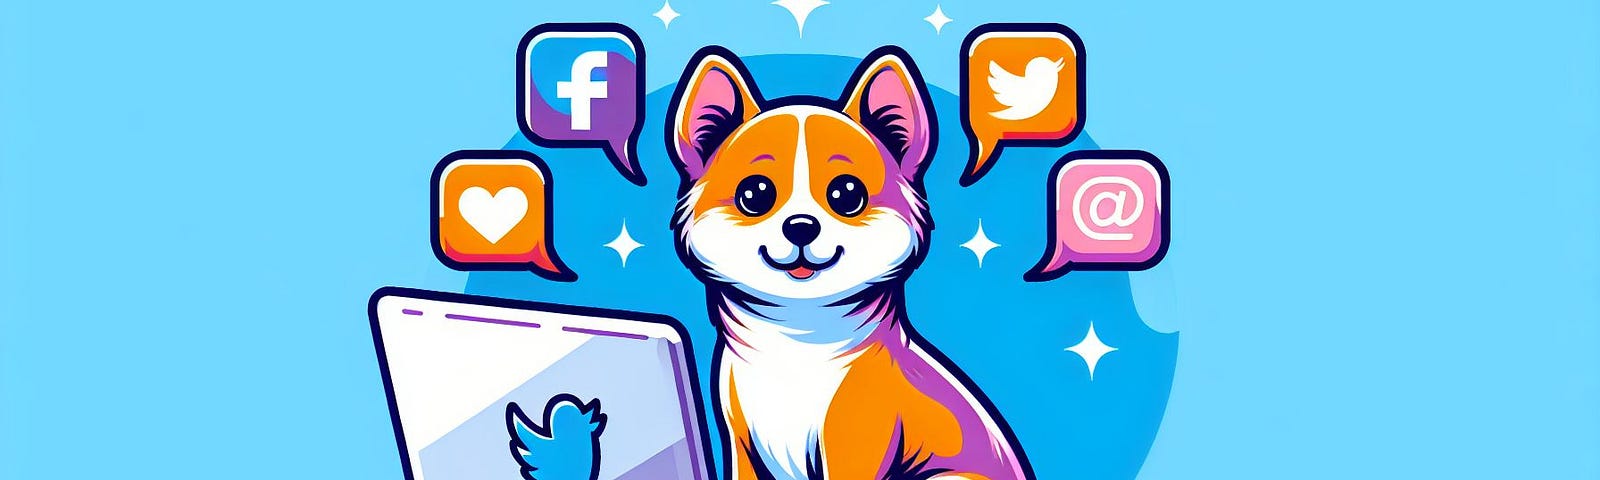 A cute pet (dog or cat) sitting in front of a laptop with social media icons on the screen, representing the concept of turning your pet’s cuteness into a thriving online presence.